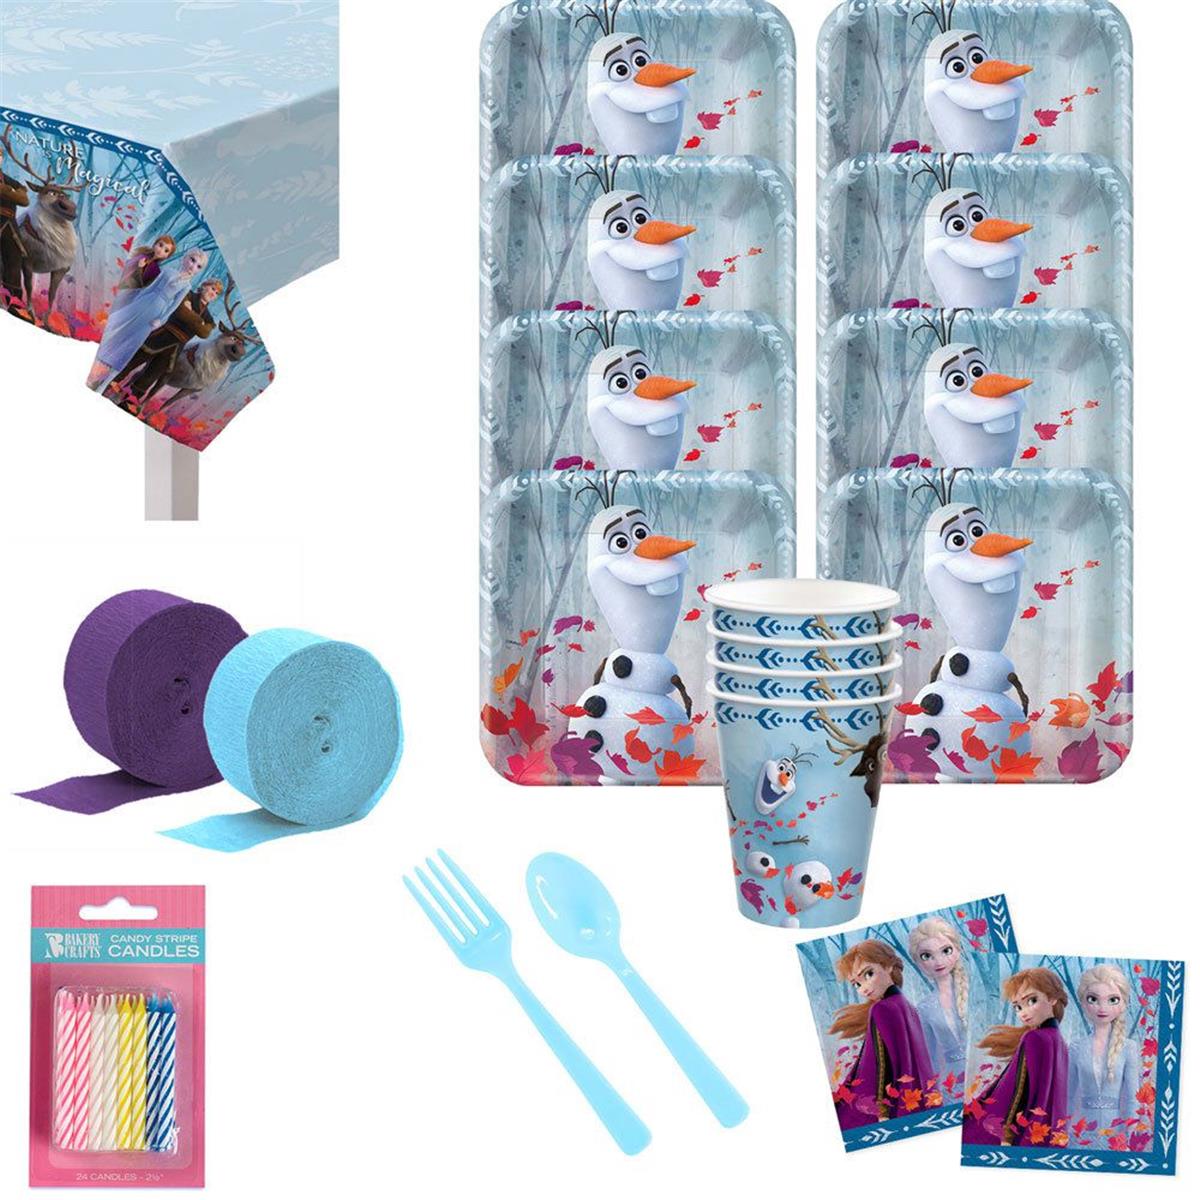 Picture of Birth9999 625378 Frozen 2 Deluxe Tableware Kit - Serves 8